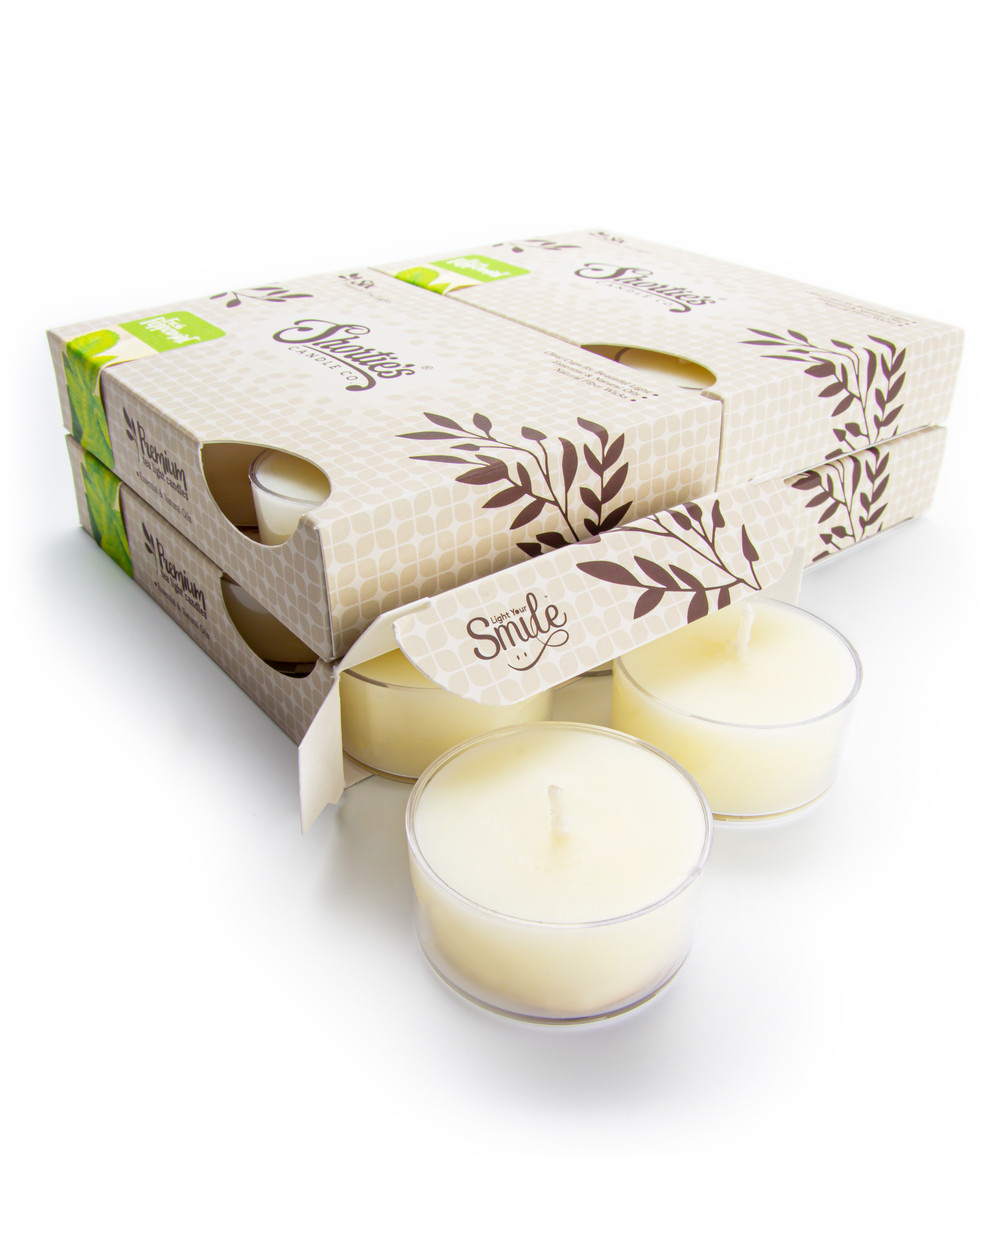 Fresh Peppermint Wax Melts - Highly Scented + Natural Oils - Shortie's  Candle Company 